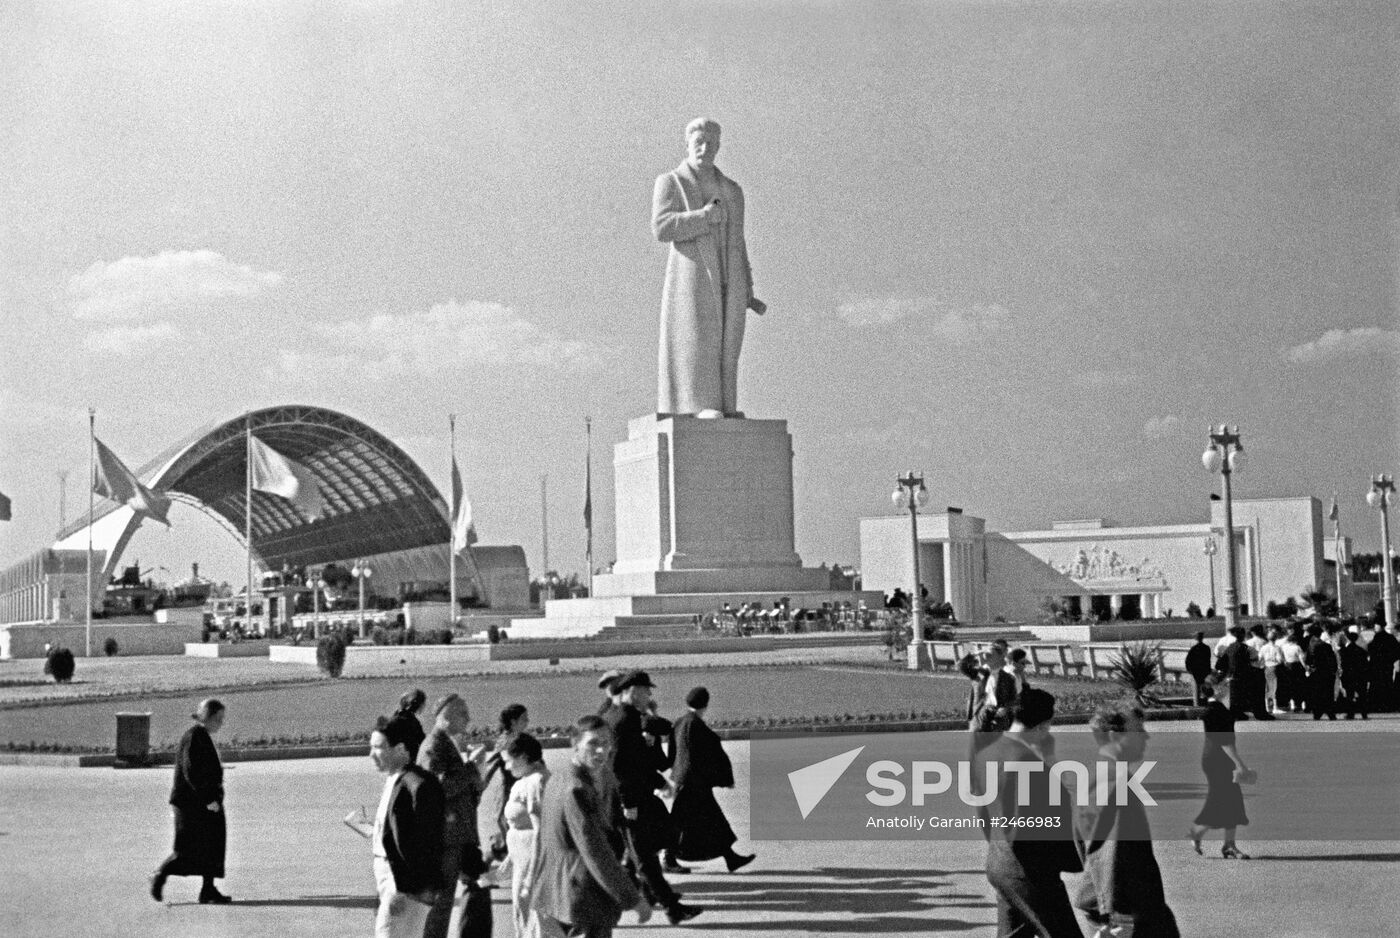 Stalin sculpture at the Agricultural Exhibition of VDNKh